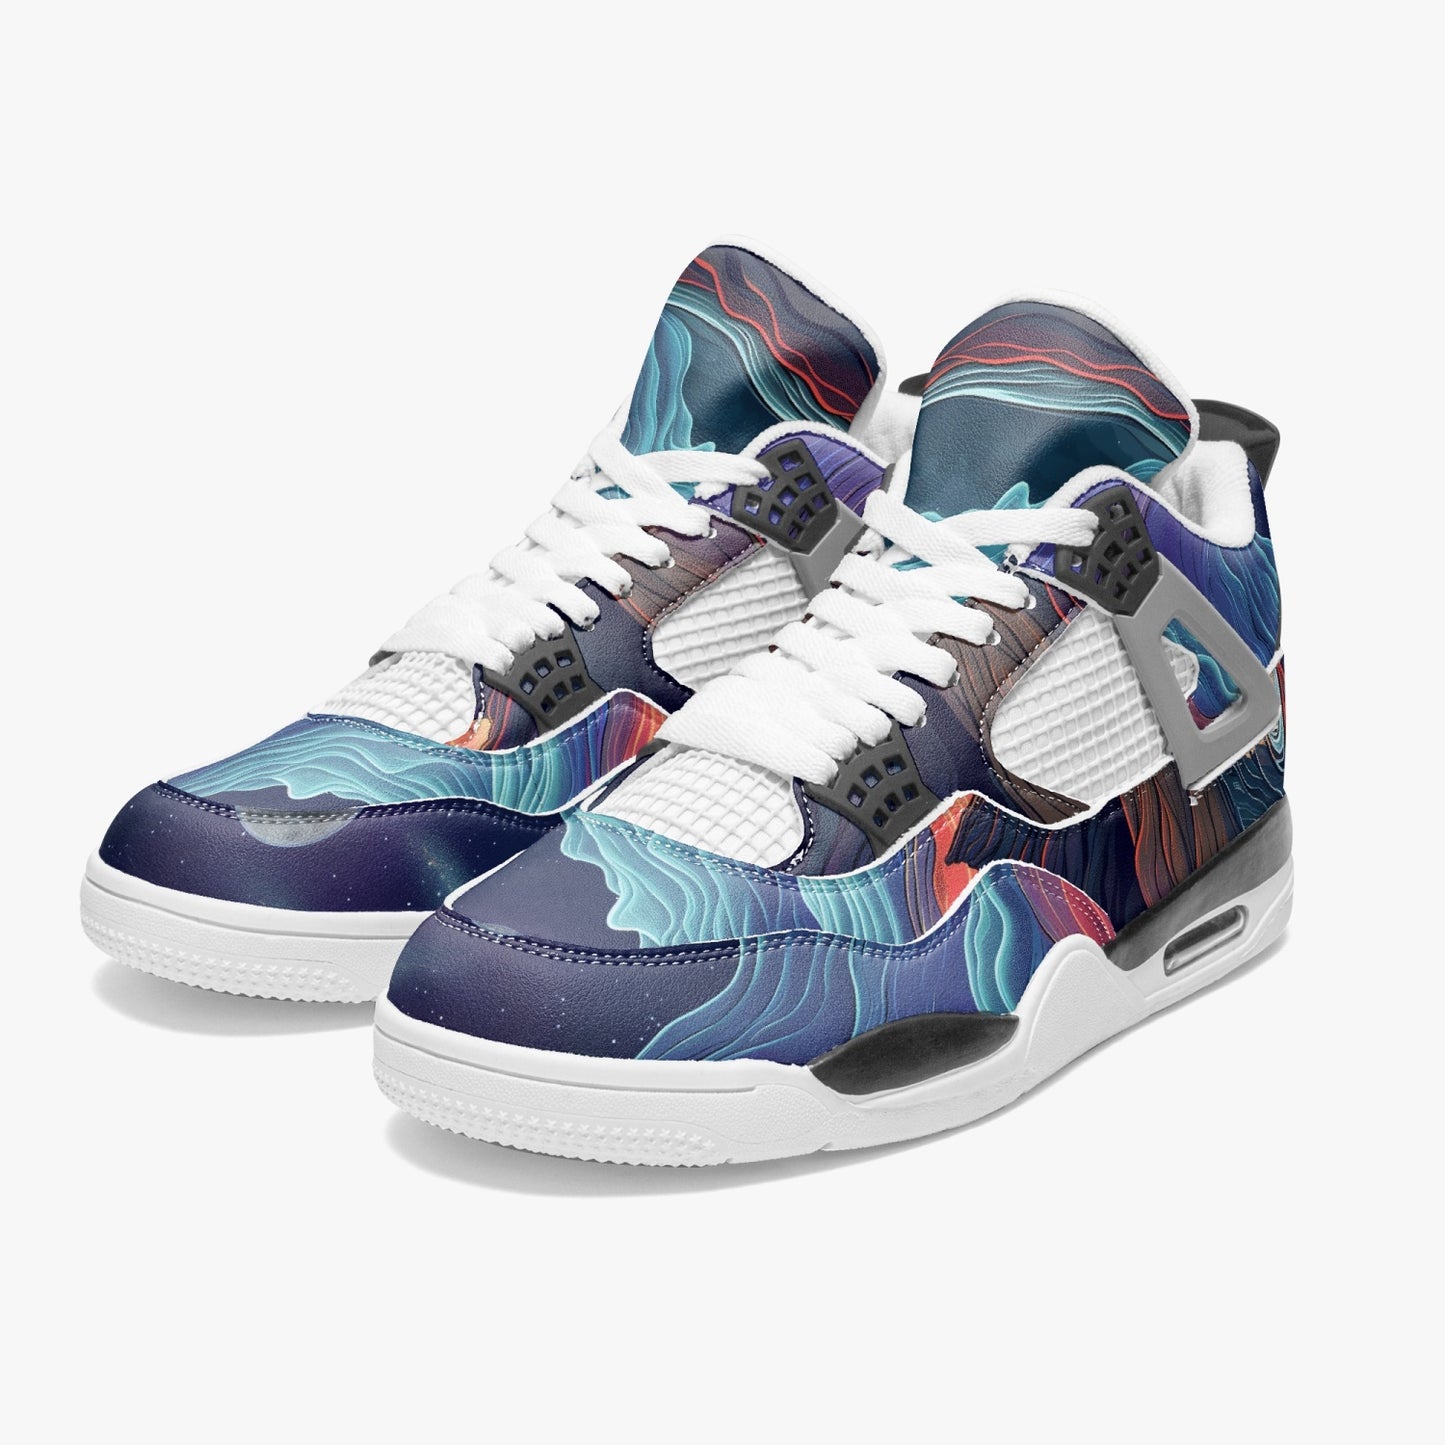 Wave of Elegance: Colorful Vegan Leather Sneakers | Step into Vibrancy